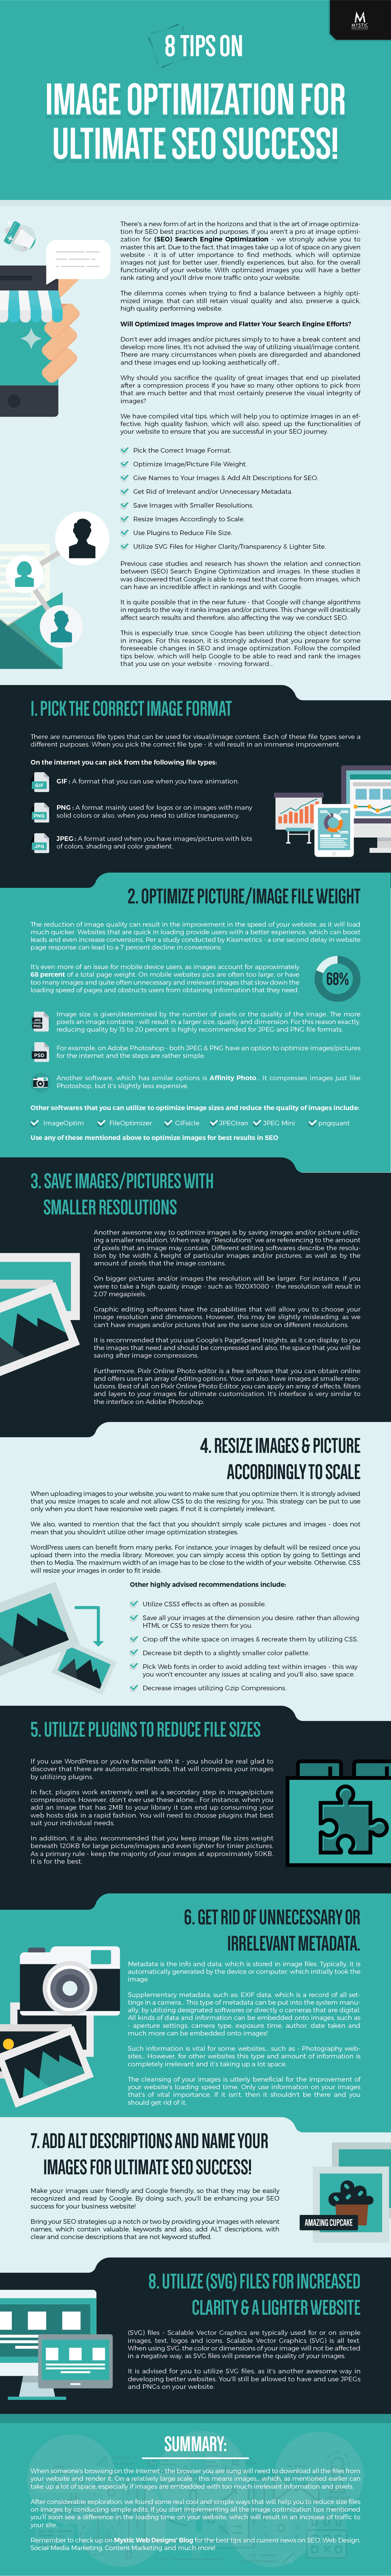 8 Tips on Image Optimization for Ultimate SEO Success!